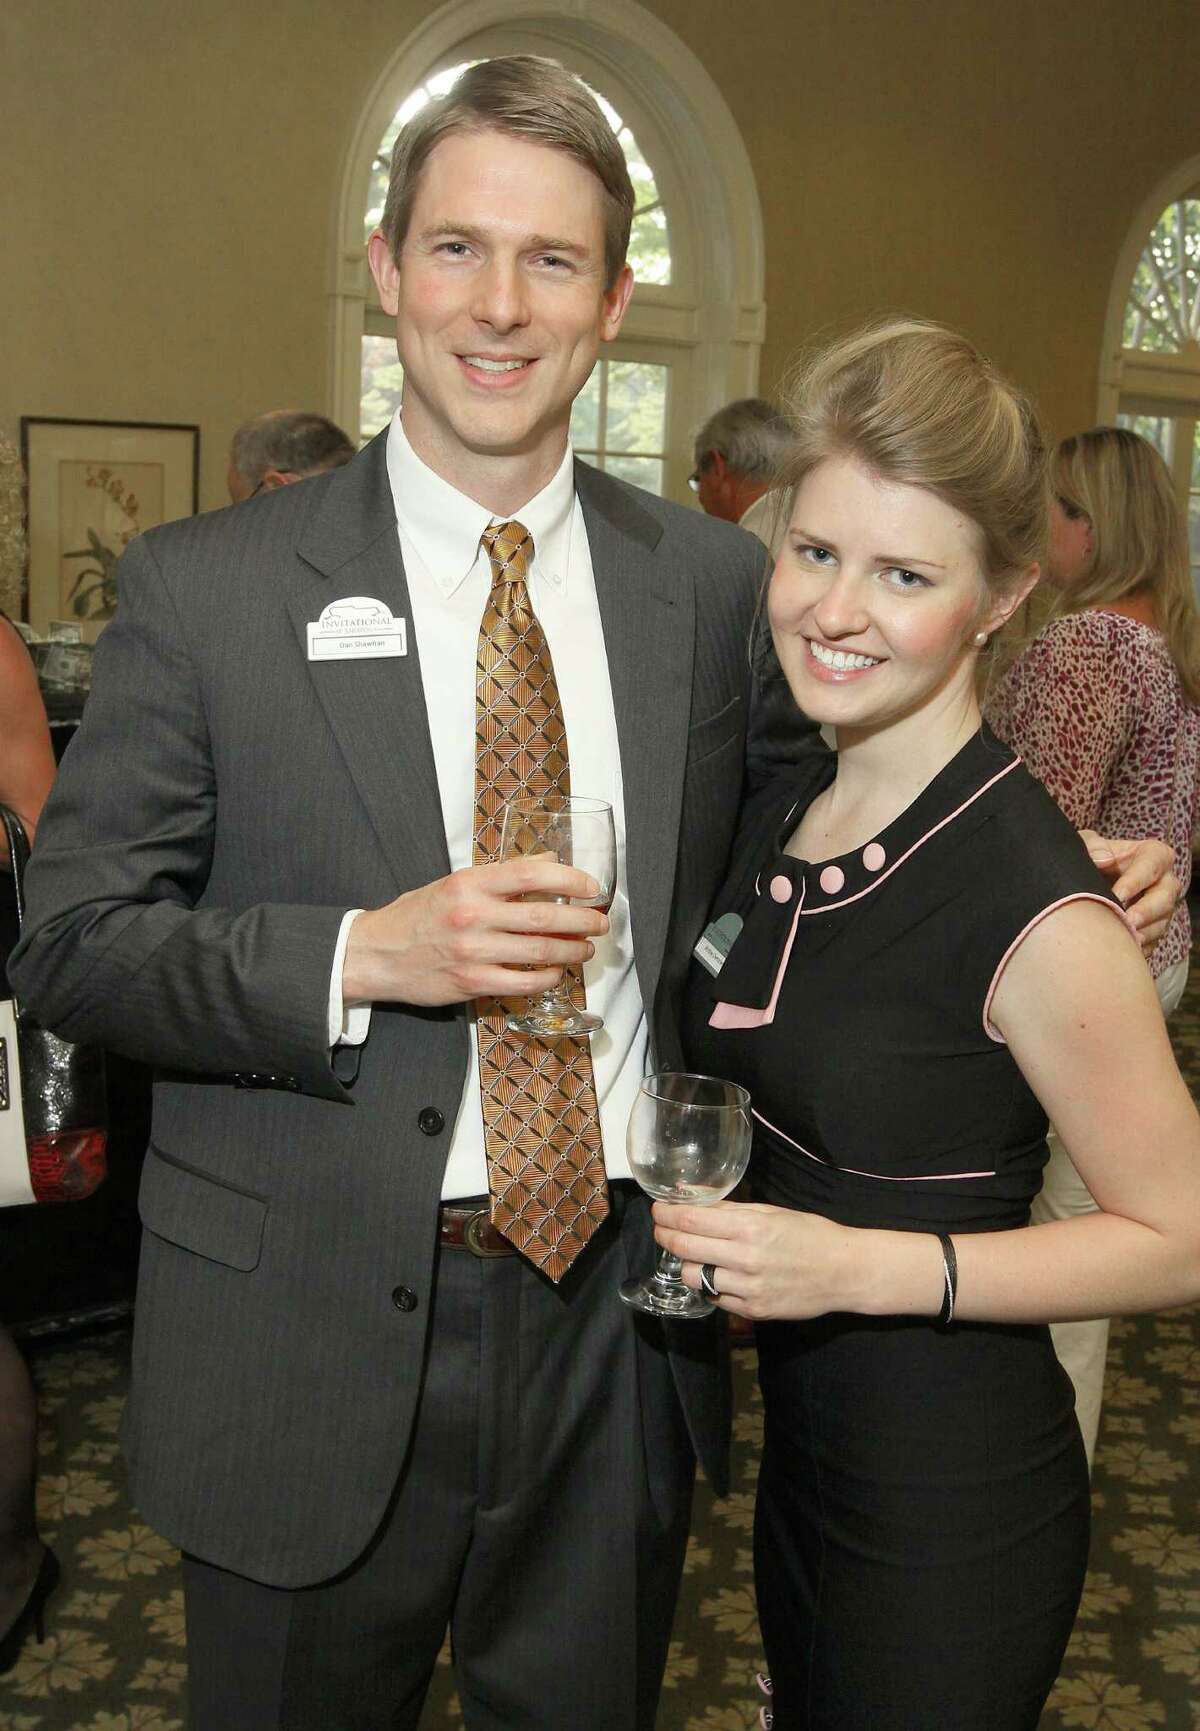 Saratoga Springs, NY - May 20, 2012 - (Photo by Joe Putrock/Special to the Times Union) - Dan Shawhan(left) and Whitney Overocker(right) during the Invitational at Saratoga Gala to benefit the Saratoga Automobile Museum's Educational Programs and The Make-A-Wish Foundation.